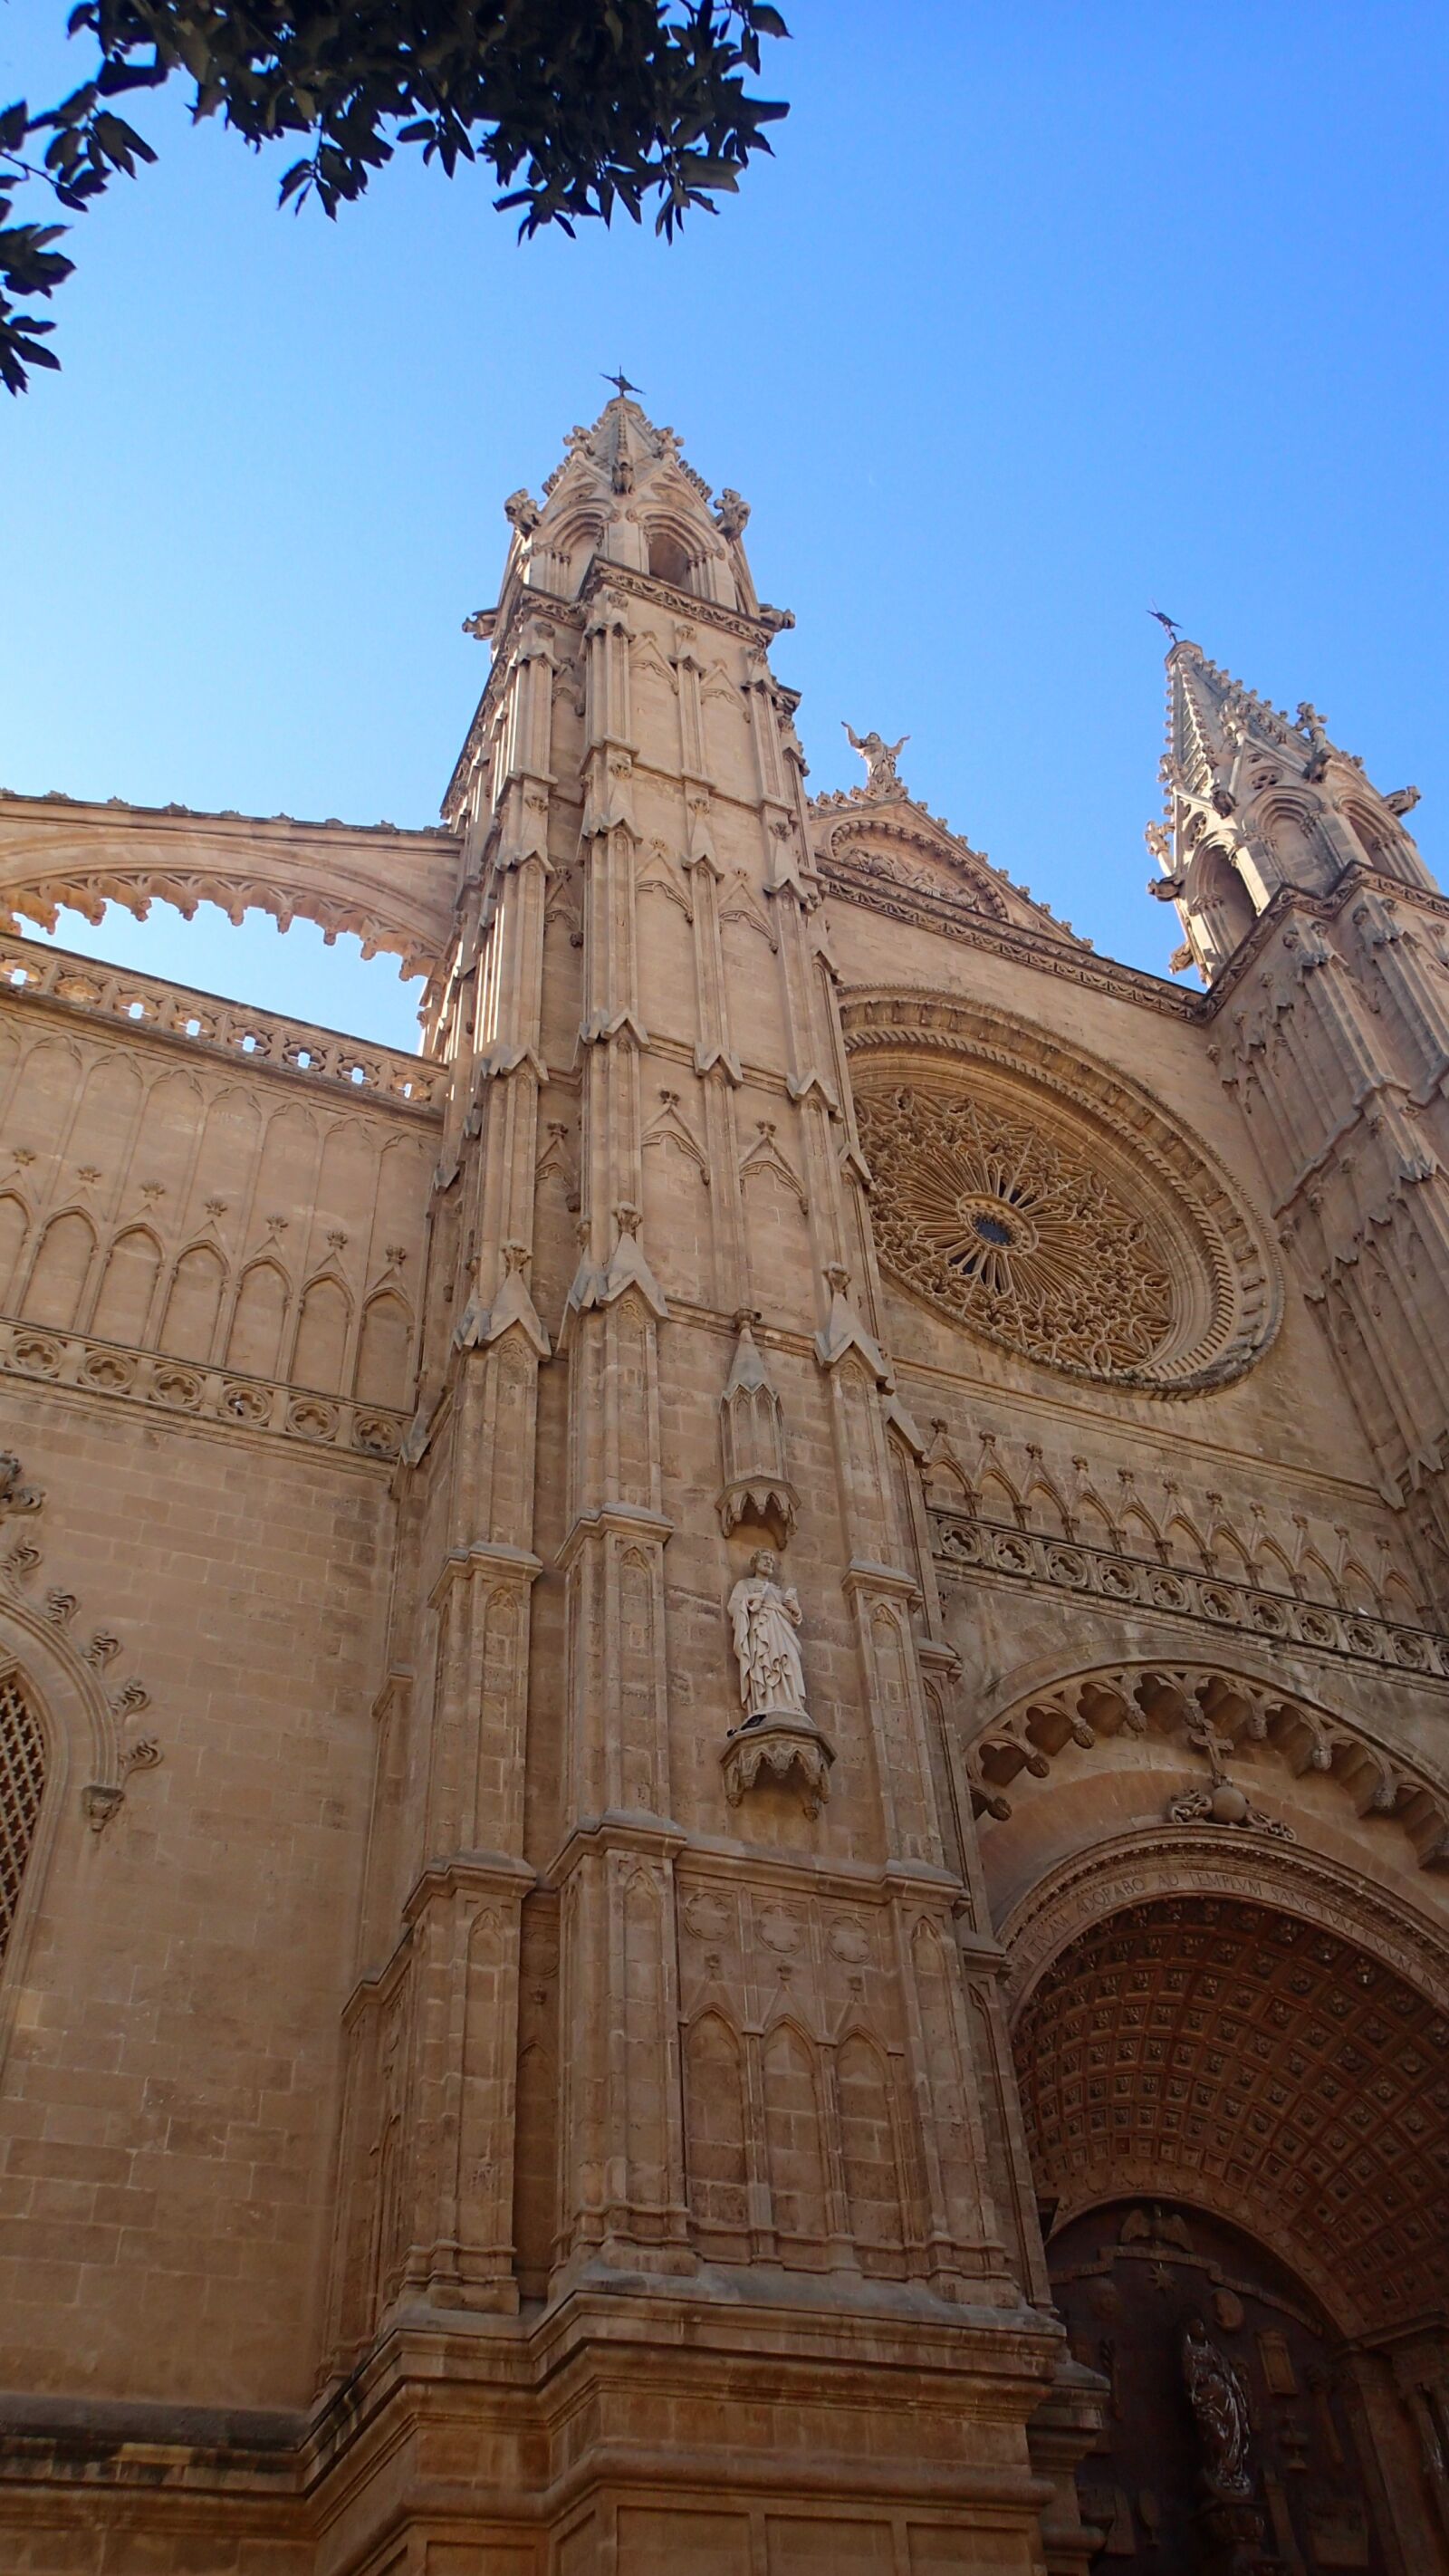 Olympus TG-2 sample photo. Palma cathedral, cathedral, cathedral photography